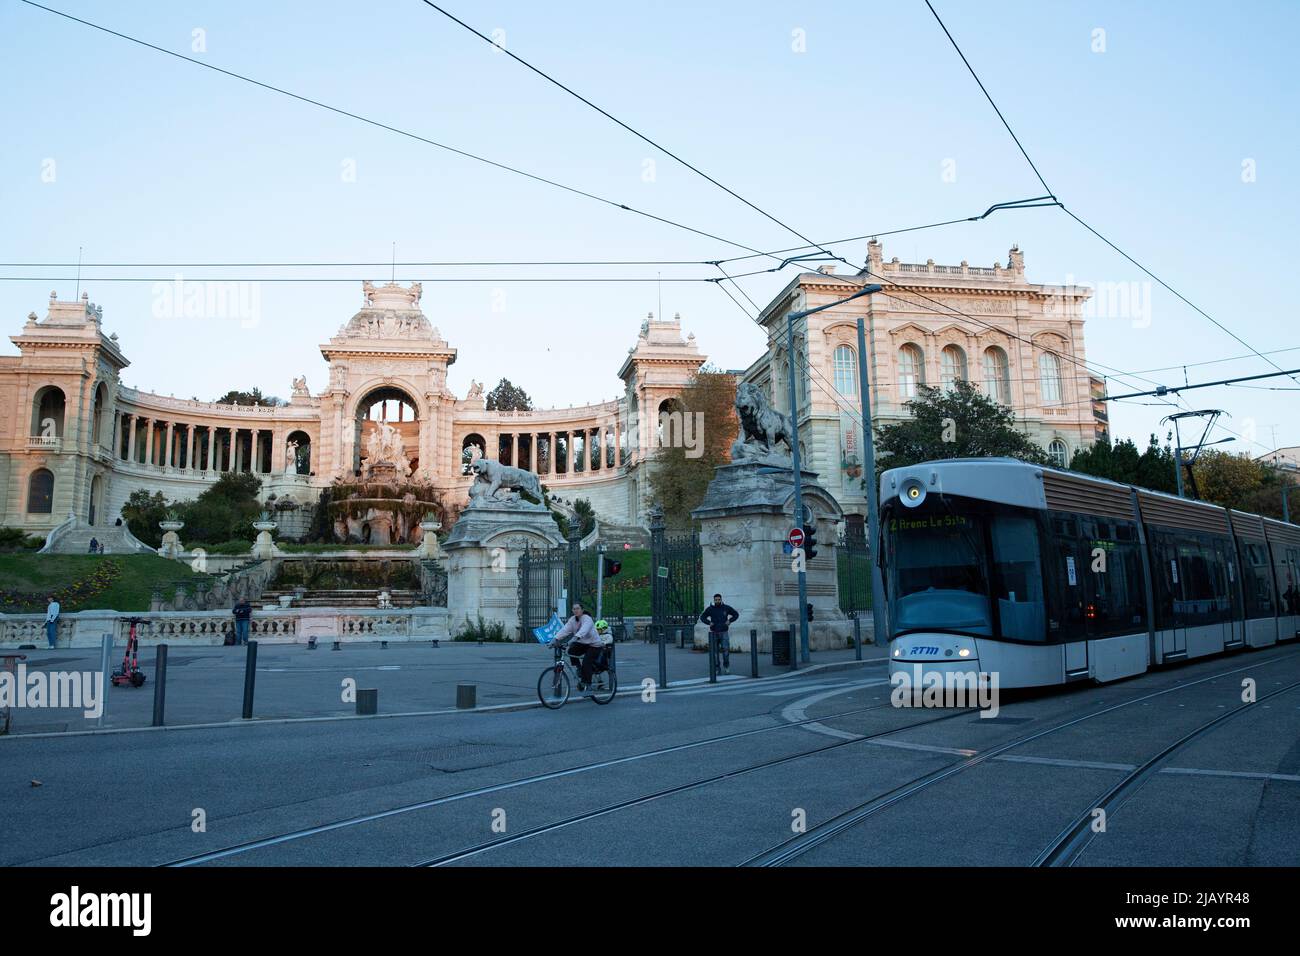 Tram network in Marseille, France on December 6, 2021. The city's modern tram network consists of three lines, serving 32 stations and operating over 15.8 kilometres (9.8 miles) of route. It opened on July 2007. Photograph by Bénédicte Desrus Stock Photo